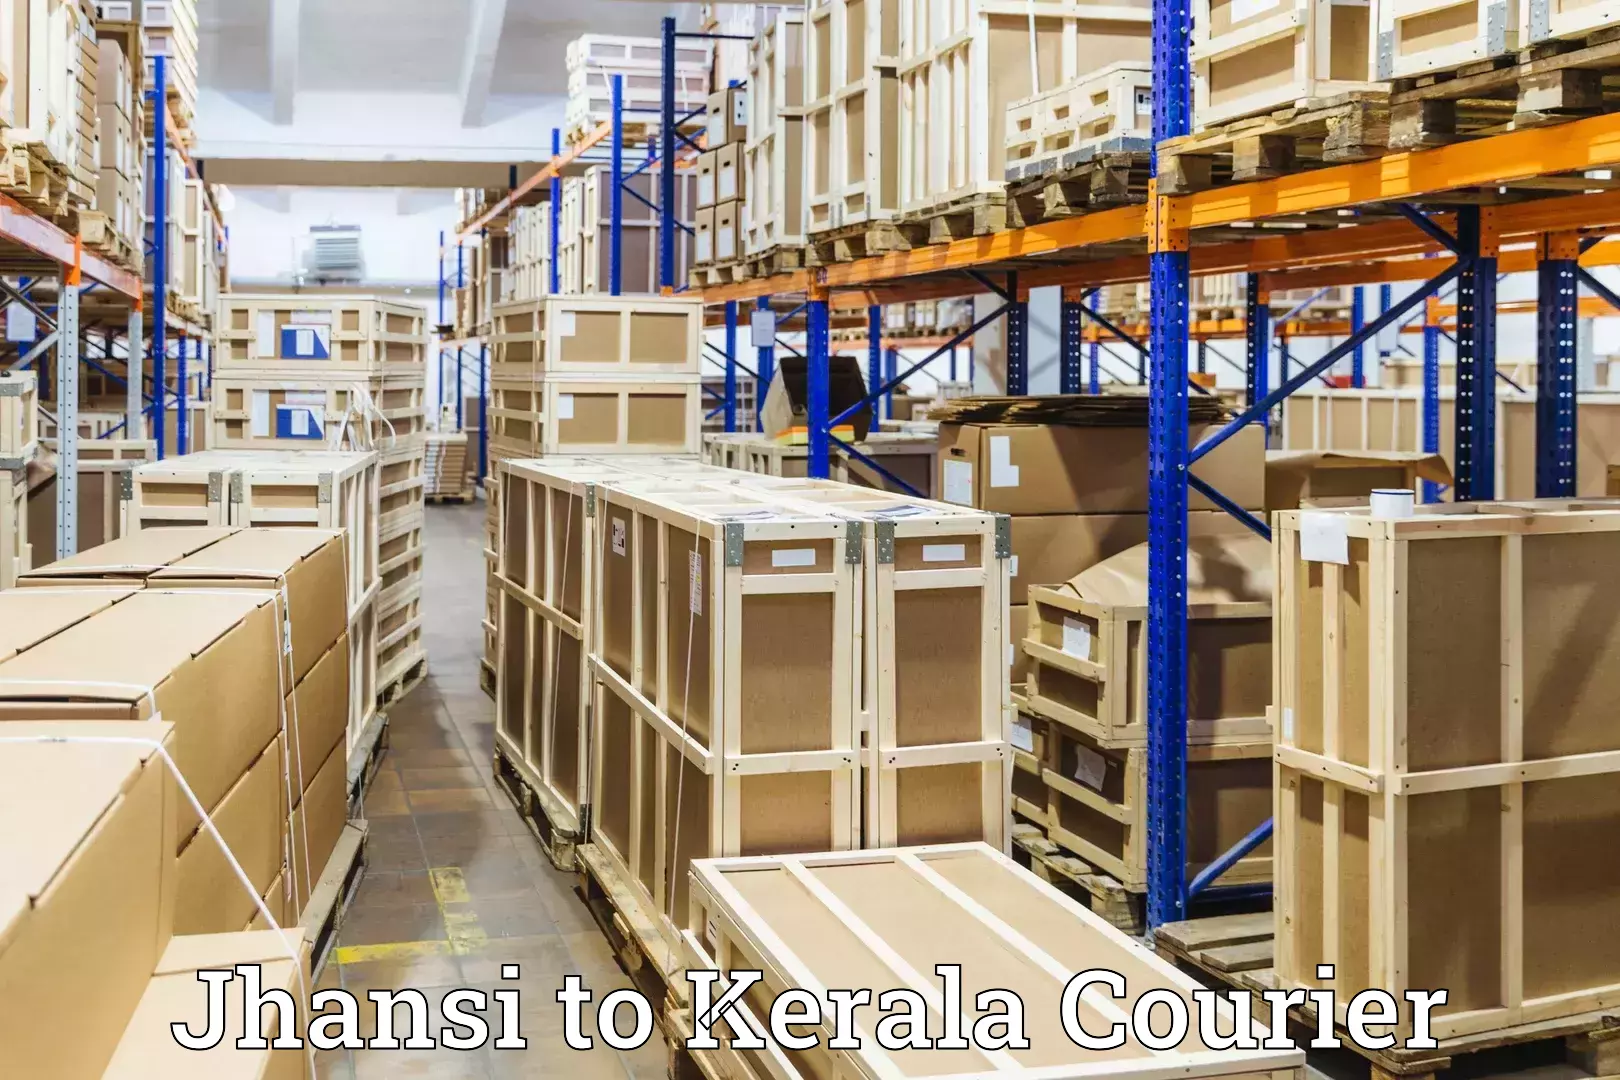 Luggage shipment specialists Jhansi to Thrissur